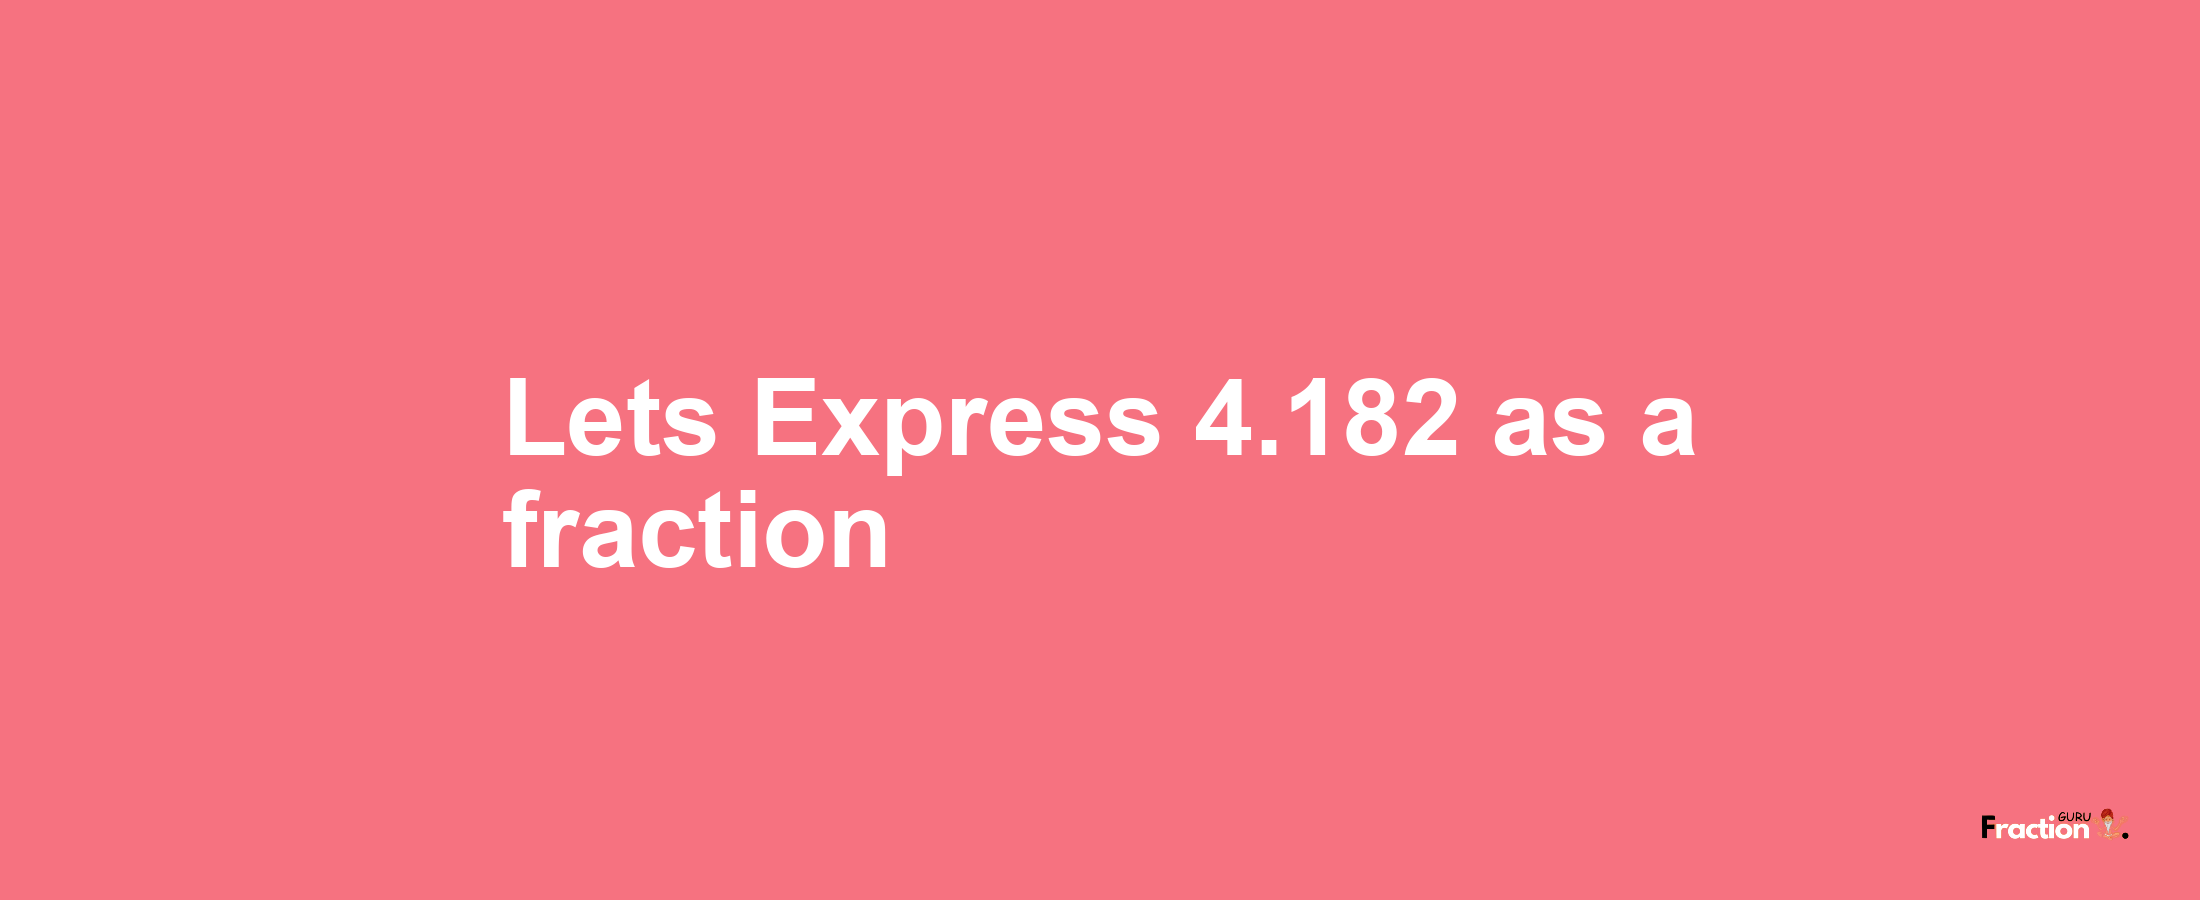 Lets Express 4.182 as afraction